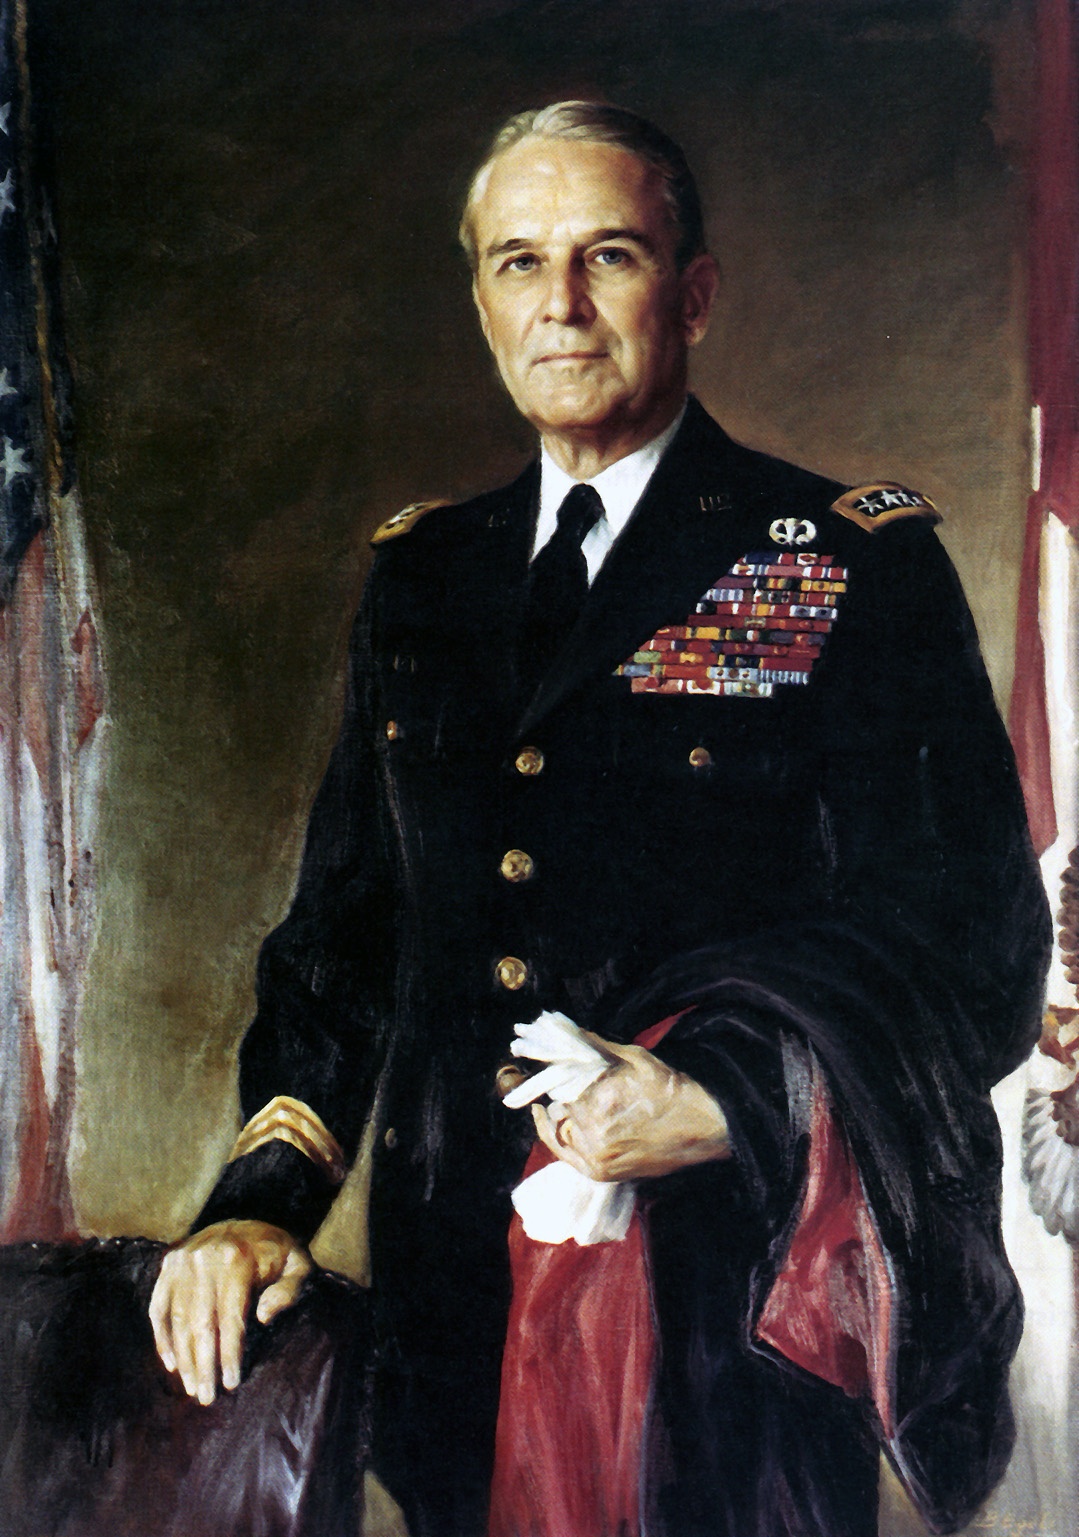 Oil painting of US Army General Maxwell Taylor, Chairman of the Joint Chiefs of Staff, circa 1962-1964